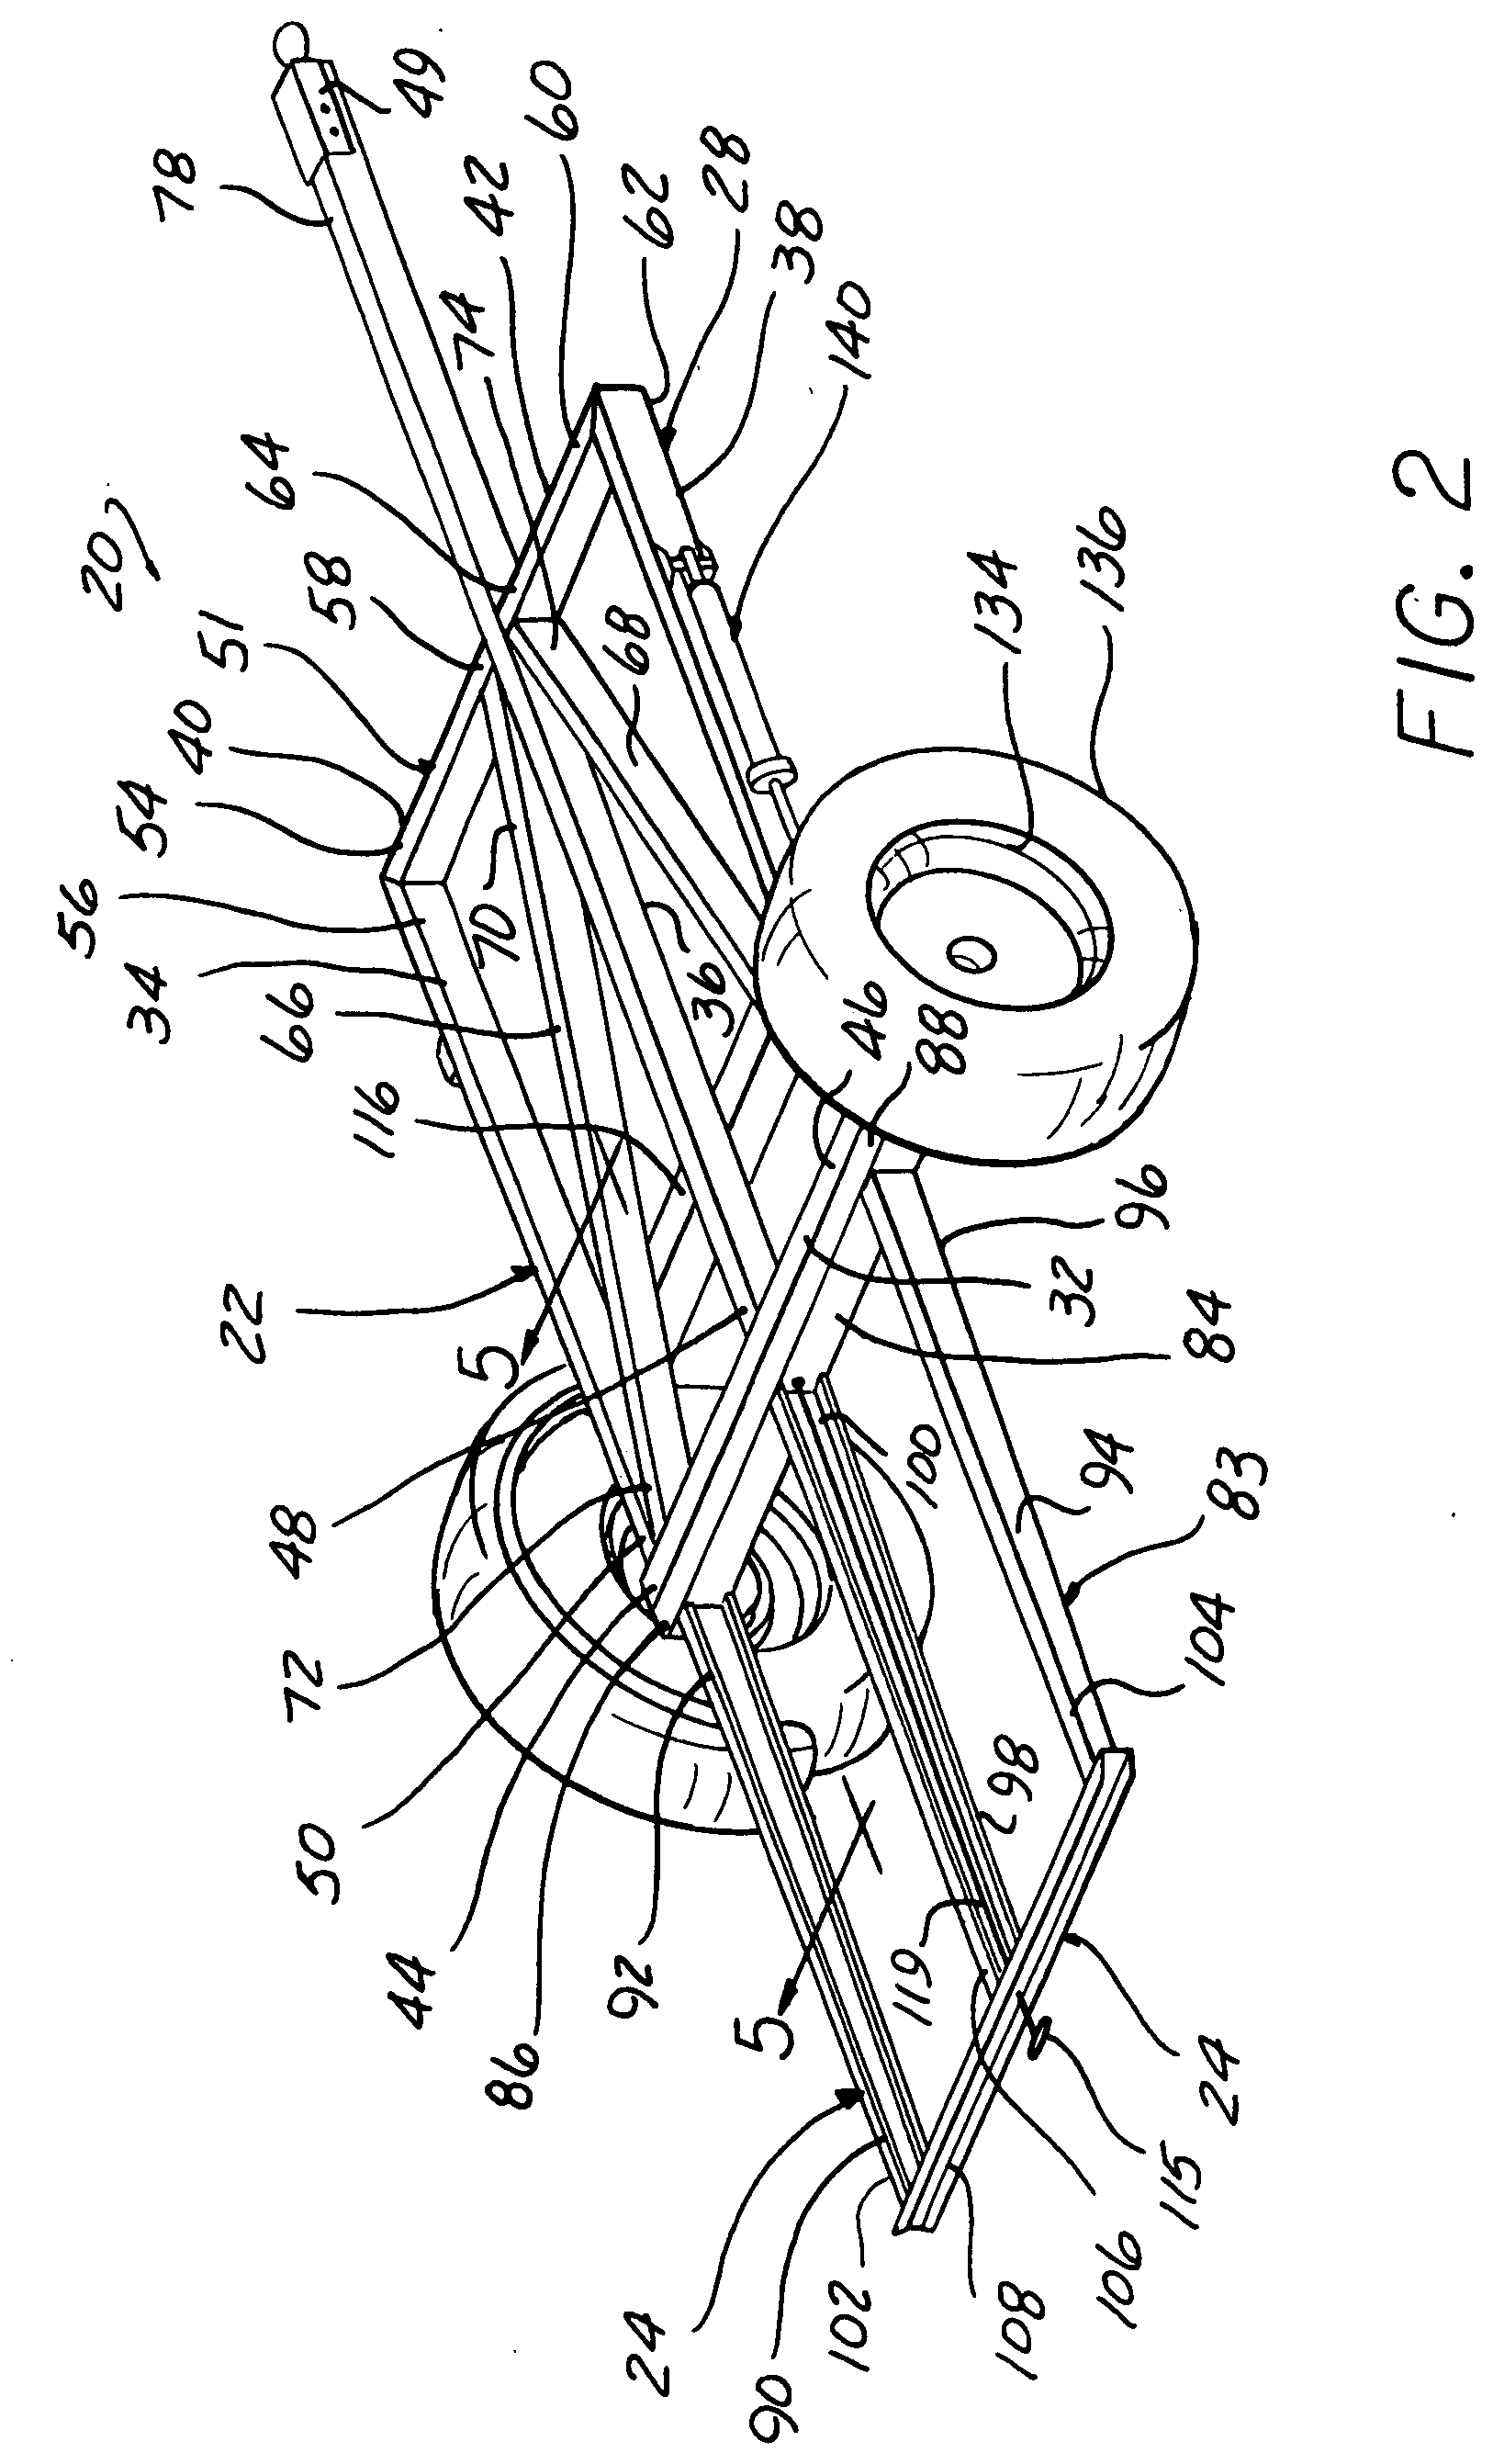 Folding trailer with kneeling device